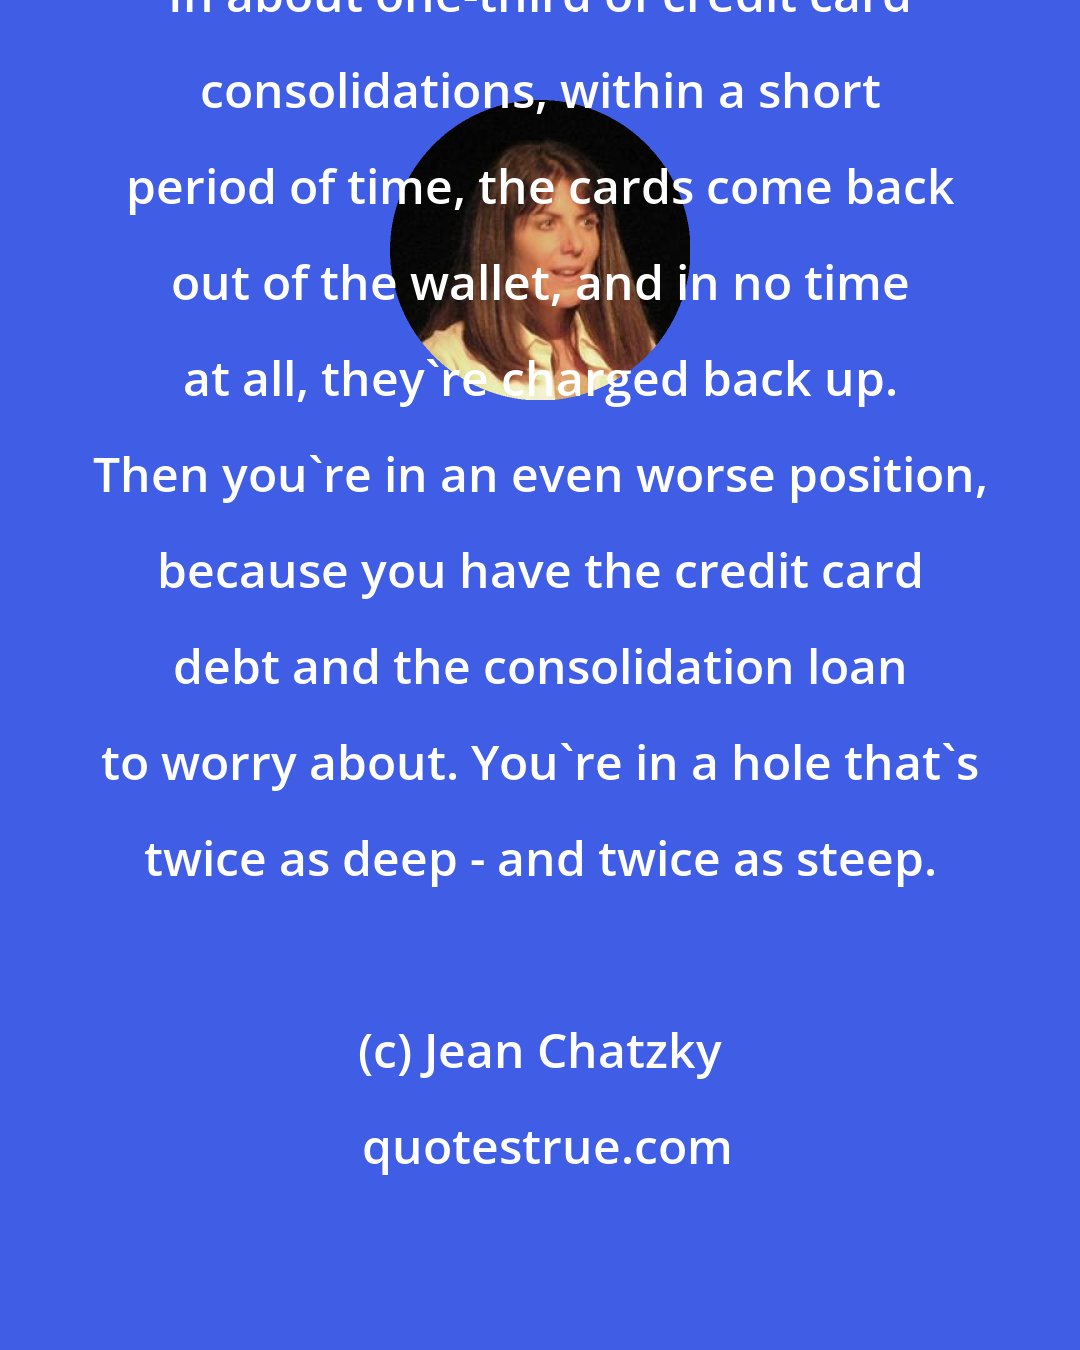 Jean Chatzky: In about one-third of credit card consolidations, within a short period of time, the cards come back out of the wallet, and in no time at all, they're charged back up. Then you're in an even worse position, because you have the credit card debt and the consolidation loan to worry about. You're in a hole that's twice as deep - and twice as steep.